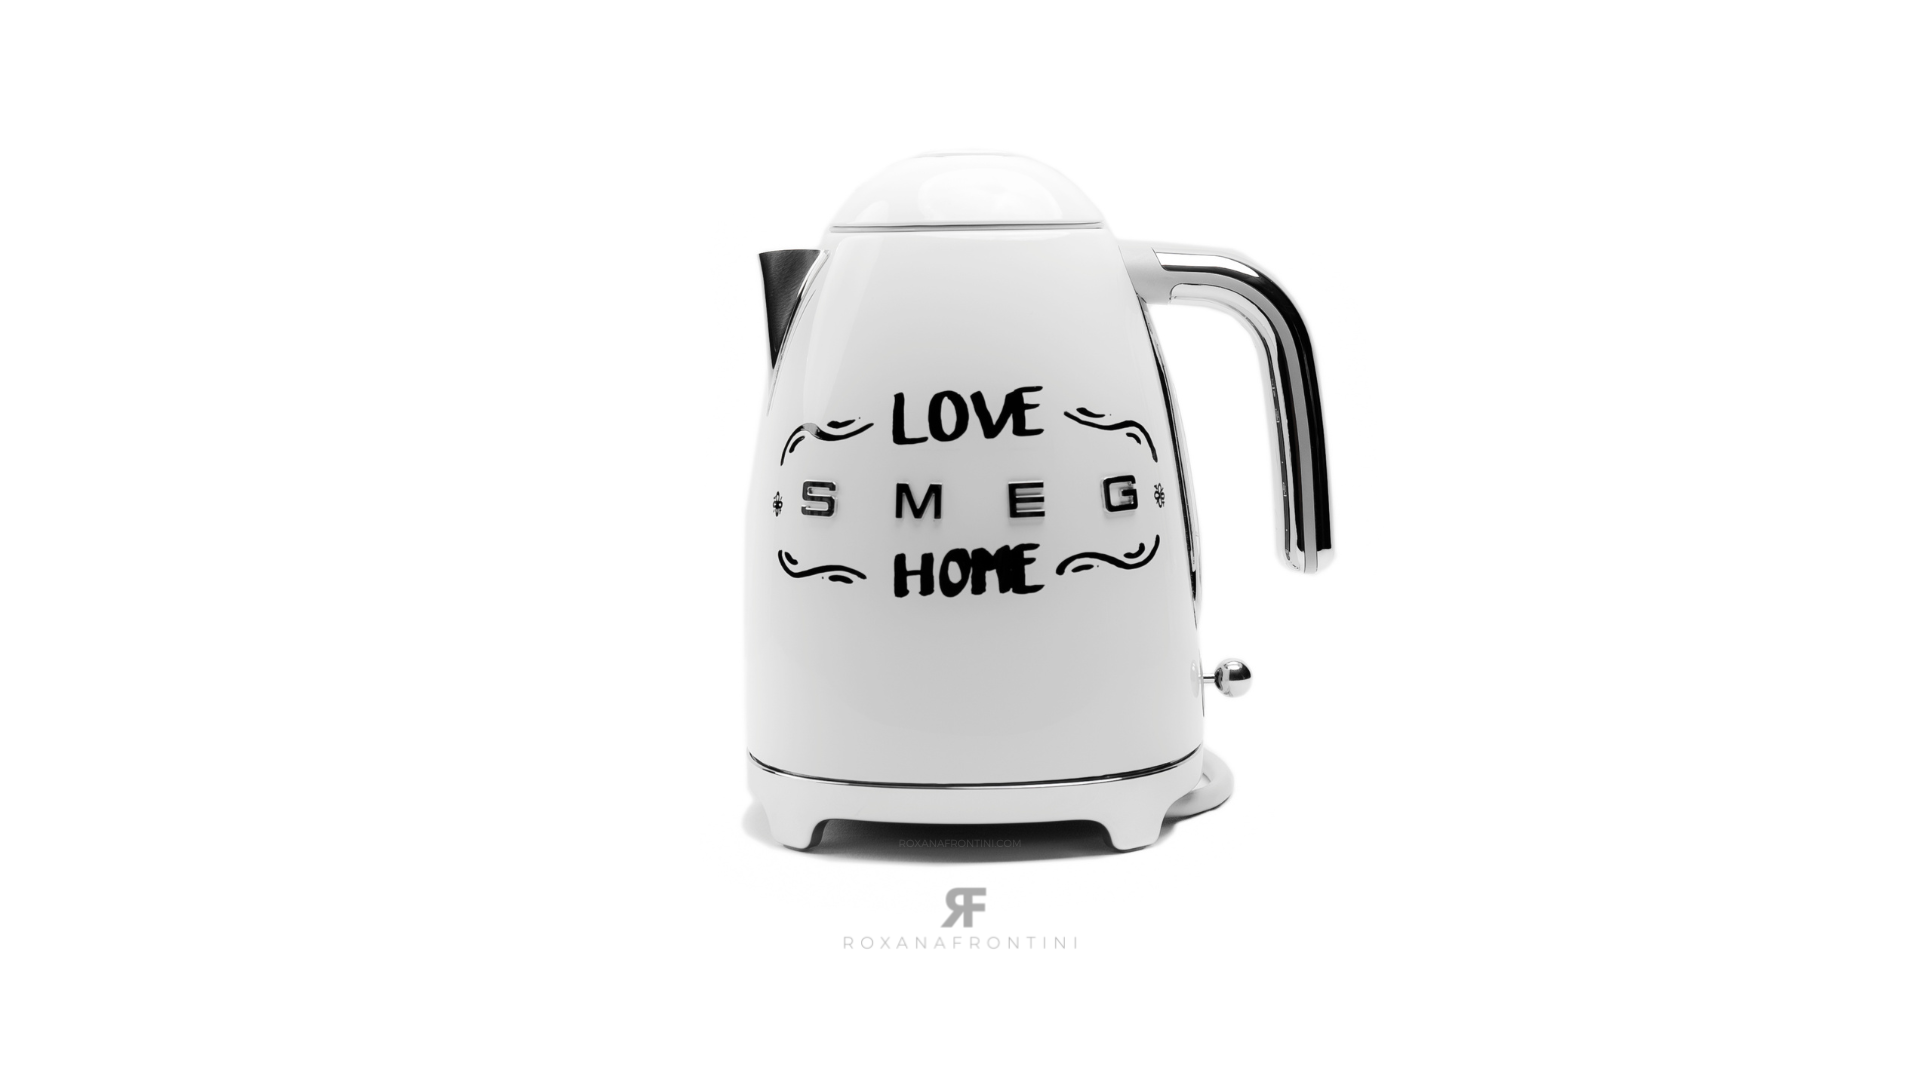 SMEG Silver & White Electric Kettle By ROXANA FRONTINI Series LOVE SWEET  HOME